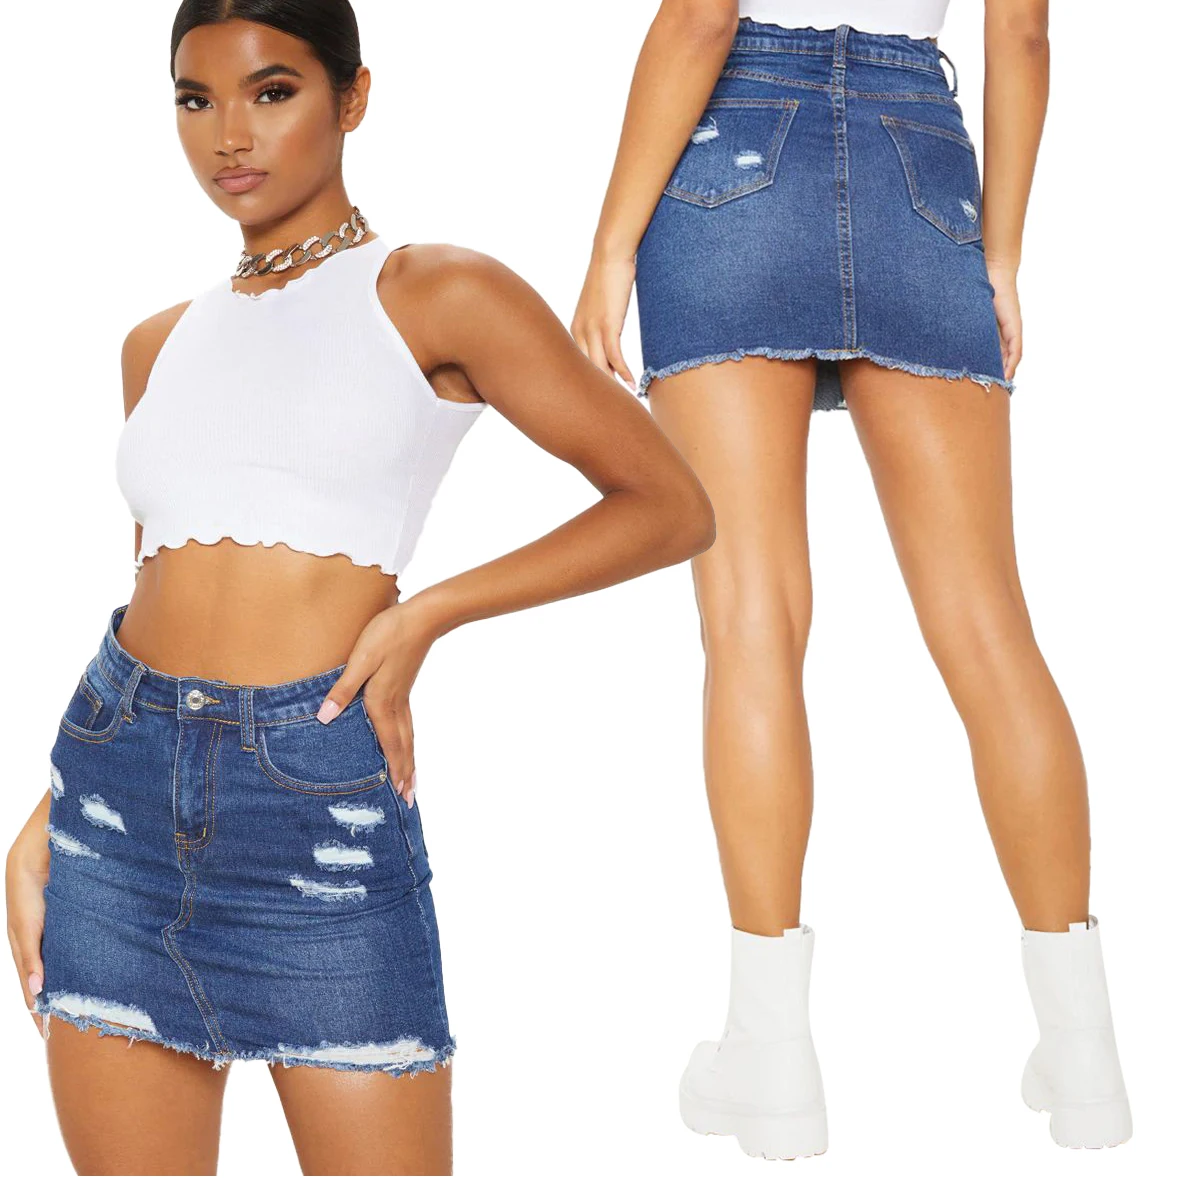 

Summer Women Summer Ripped Jean Skirts Short Youngster Girls Sexy Streetwear Mini Washed Denim Skirts, Shown